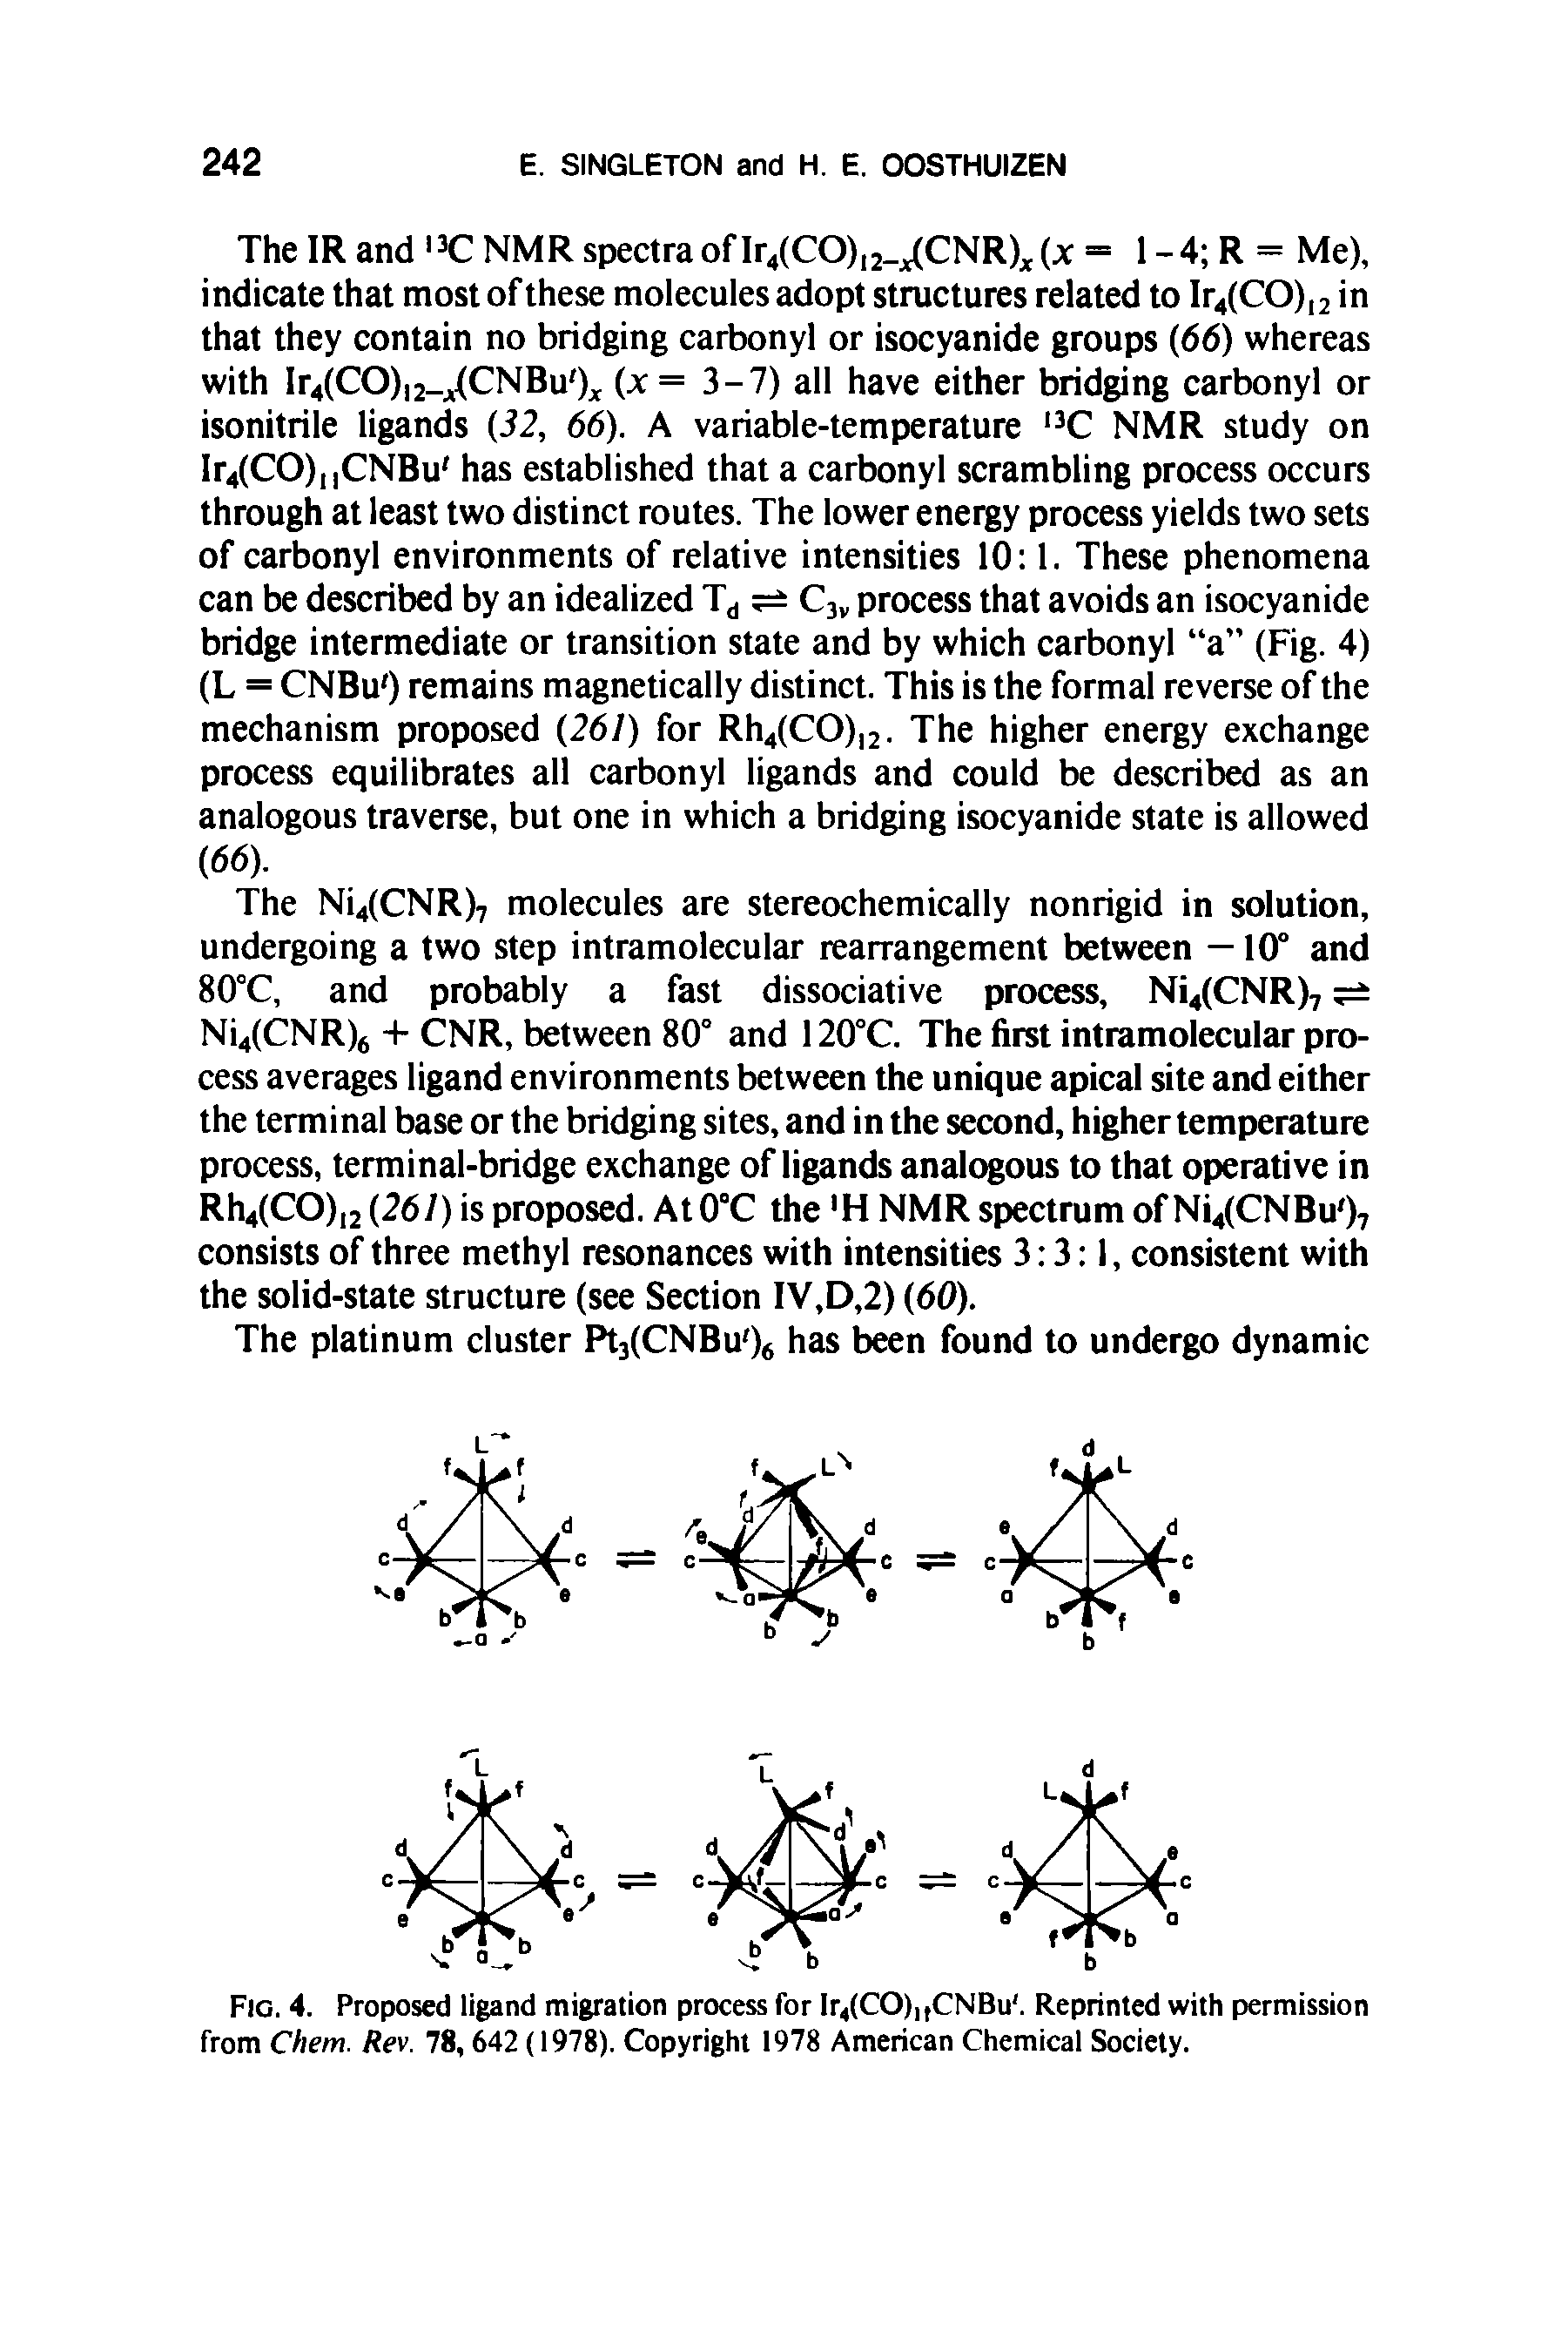 Fig. 4. Proposed ligand migration process for Ir4(CO), CNBu. Reprinted with permission from Chem. Rev. 78, 642 (1978). Copyright 1978 American Chemical Society.